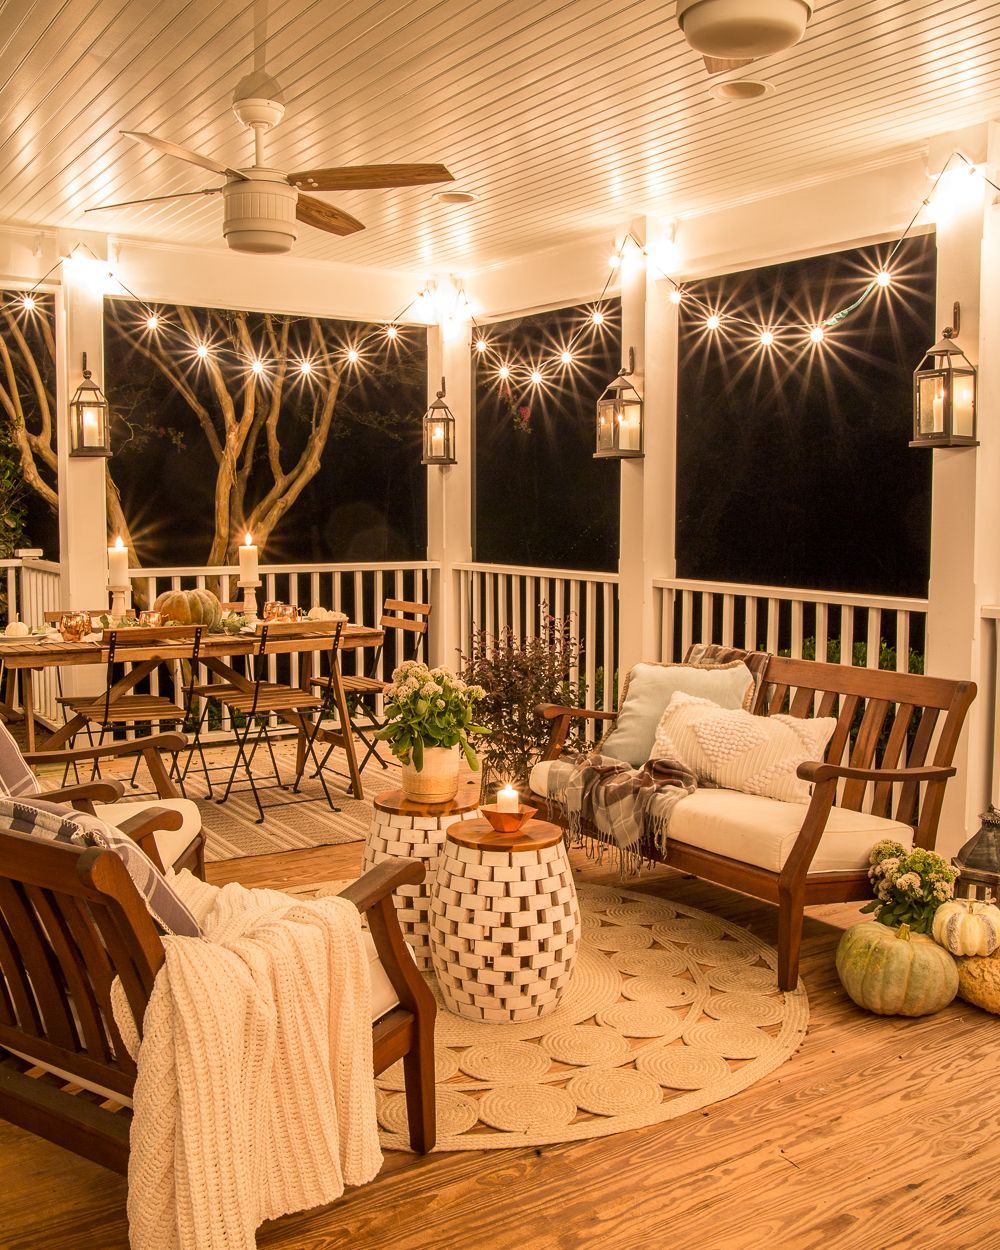 Sensational Outdoor Front Porch Ideas to elevate your home’s curb appeal